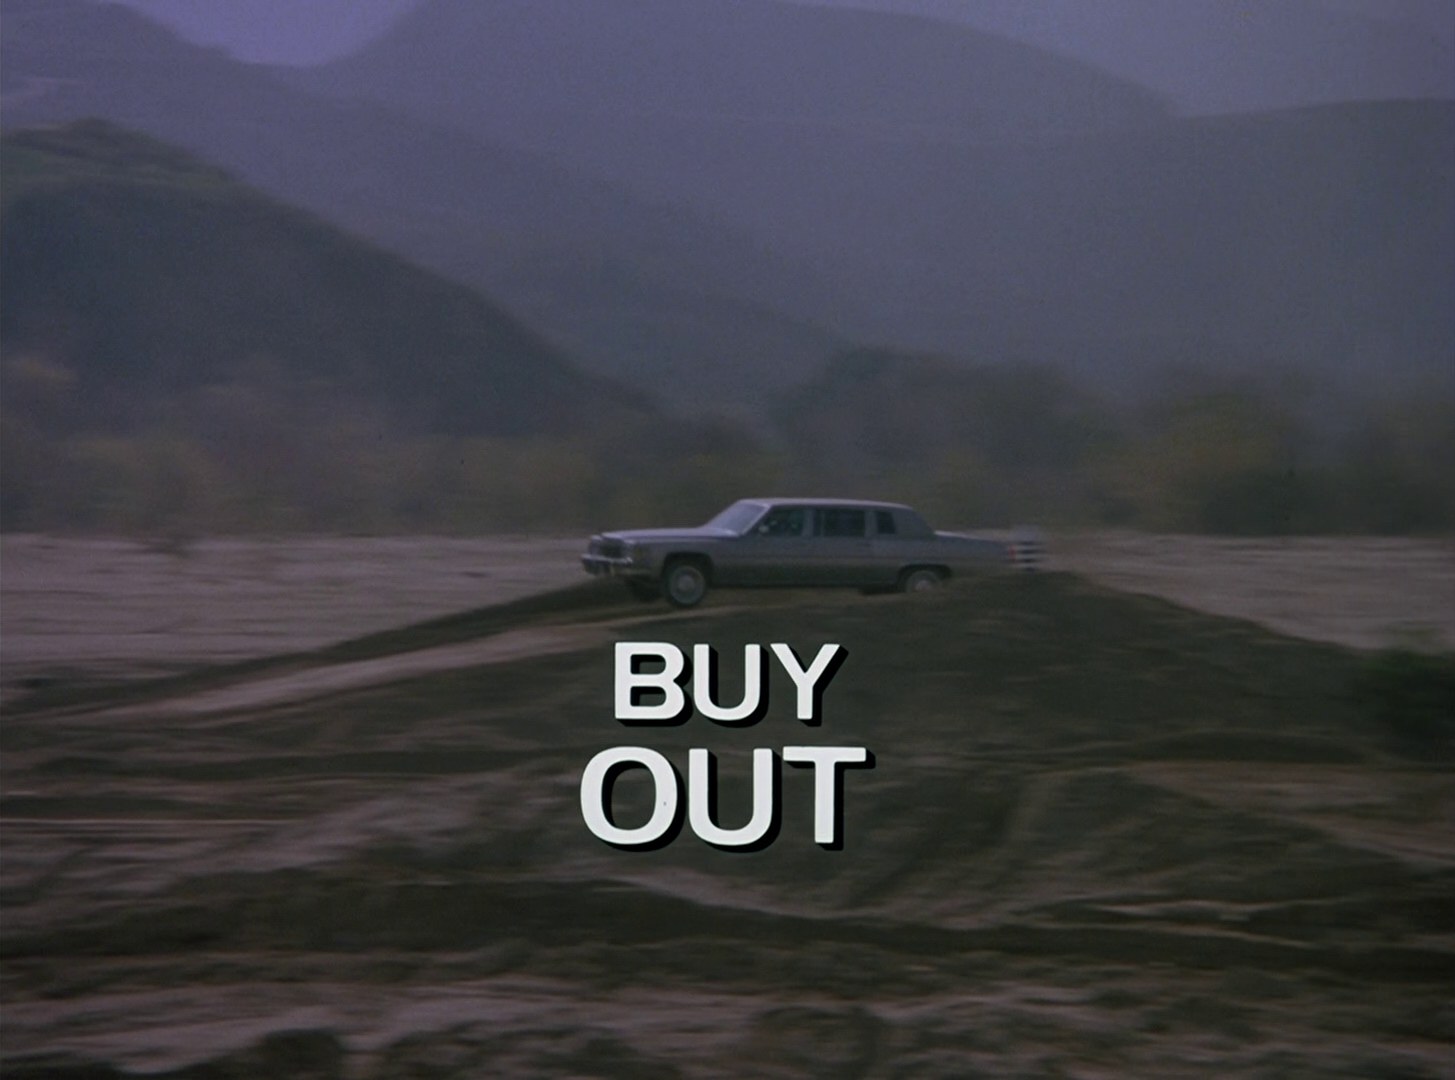 Knight Rider Season 3 - Episode 56 - Buy Out - Photo 1